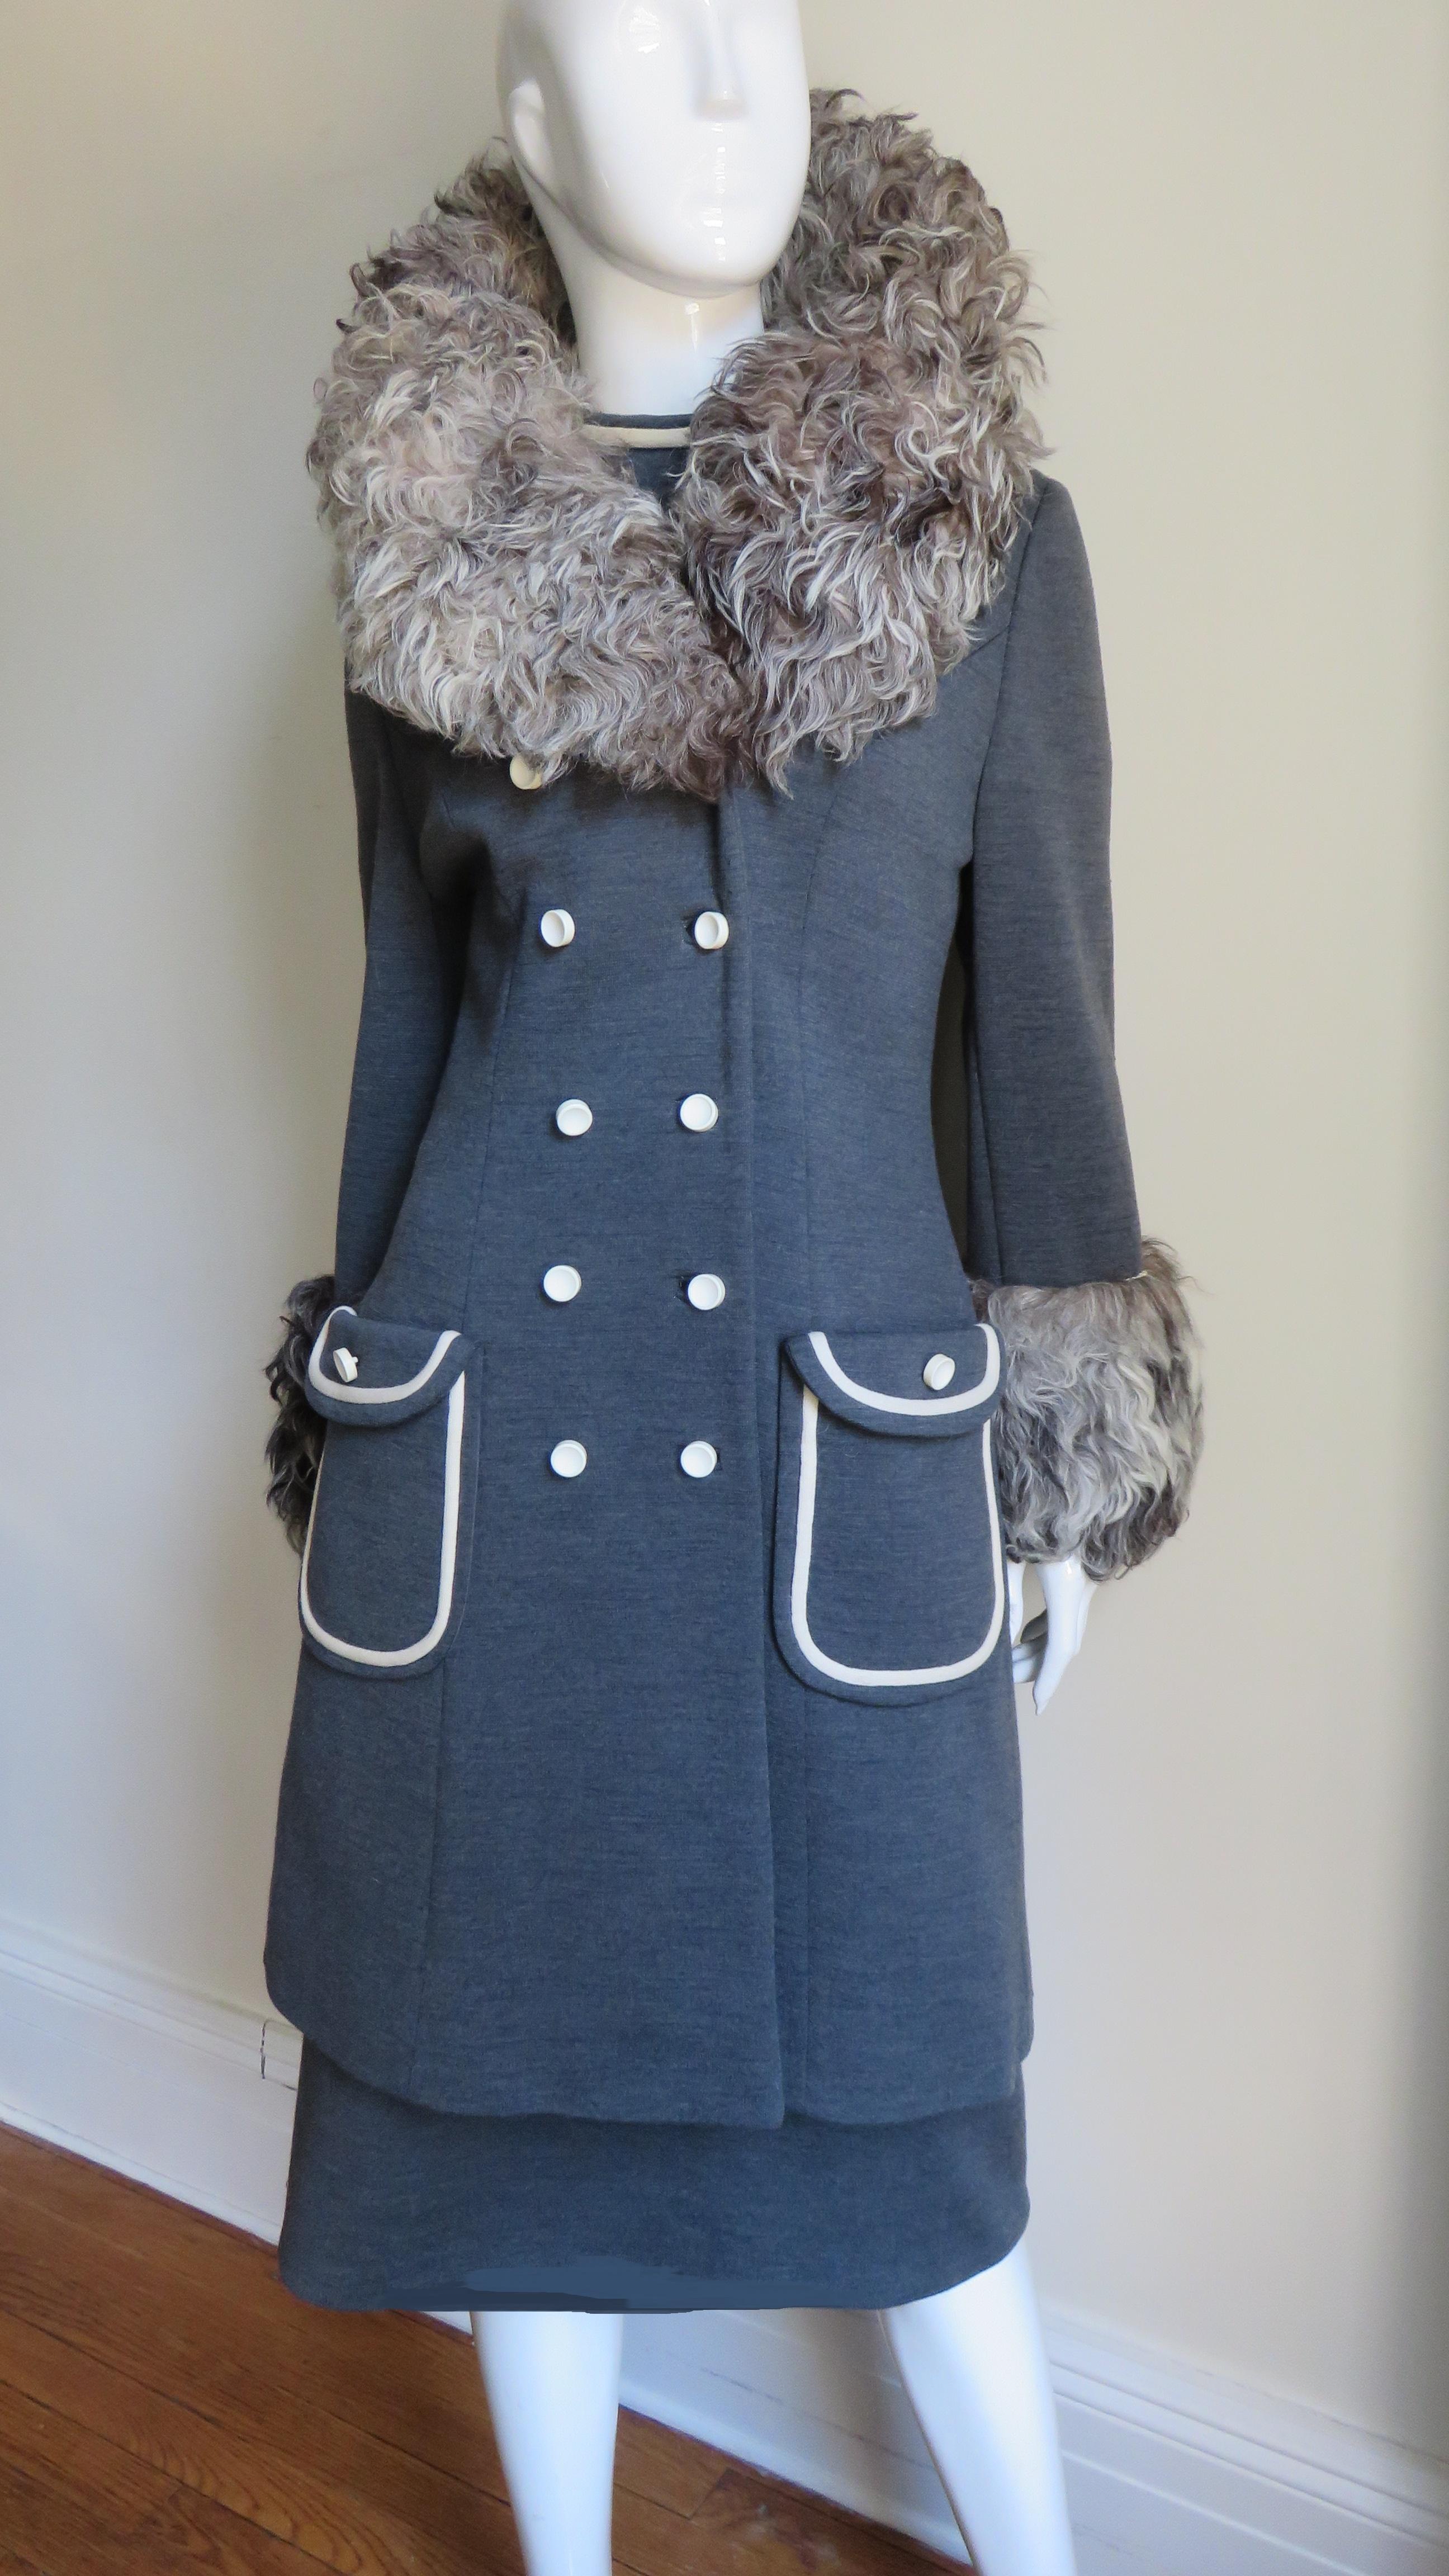 A gorgeous coat and dress set in a charcoal grey wool knit by Lilli Ann.   Swaths of off white and shades of grey Mongolian Lamb fur adorn the coat collar and cuffs.  The short sleeve dress has a waist seam, stand up collar and 2 pocket flaps all